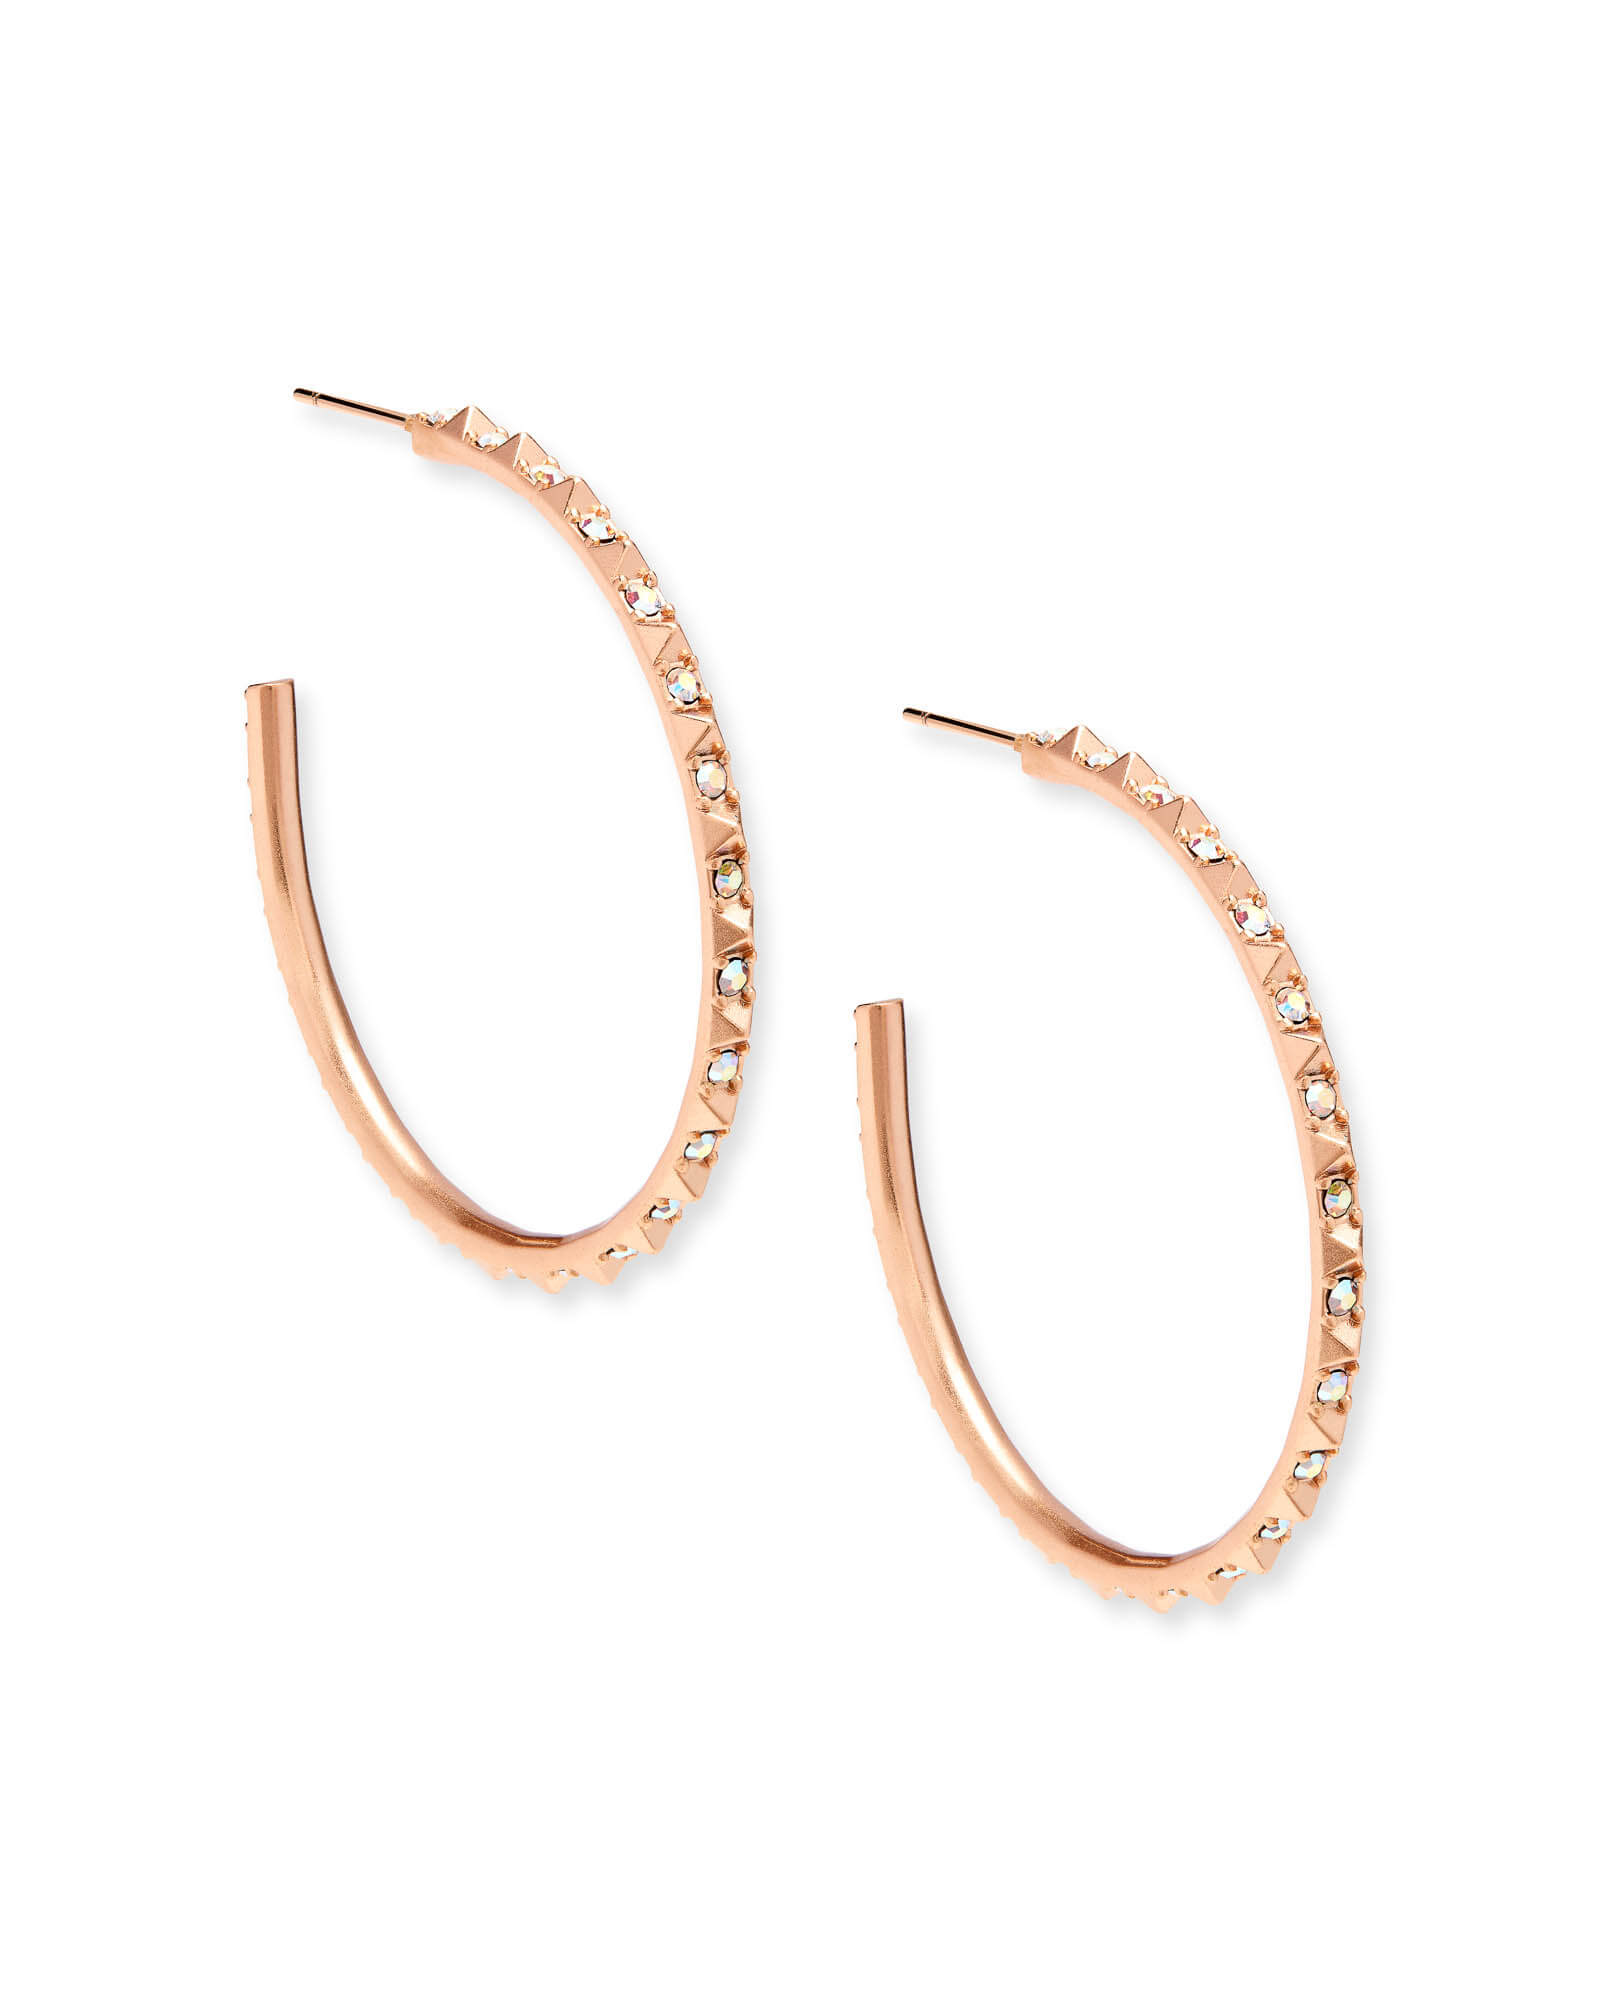 KENDRA SCOTT VERONICA COLLECTION 14 KARAT ROSE GOLD PLATED BRASS FASHION EARRINGS IRIDSCENT CRYSTAL